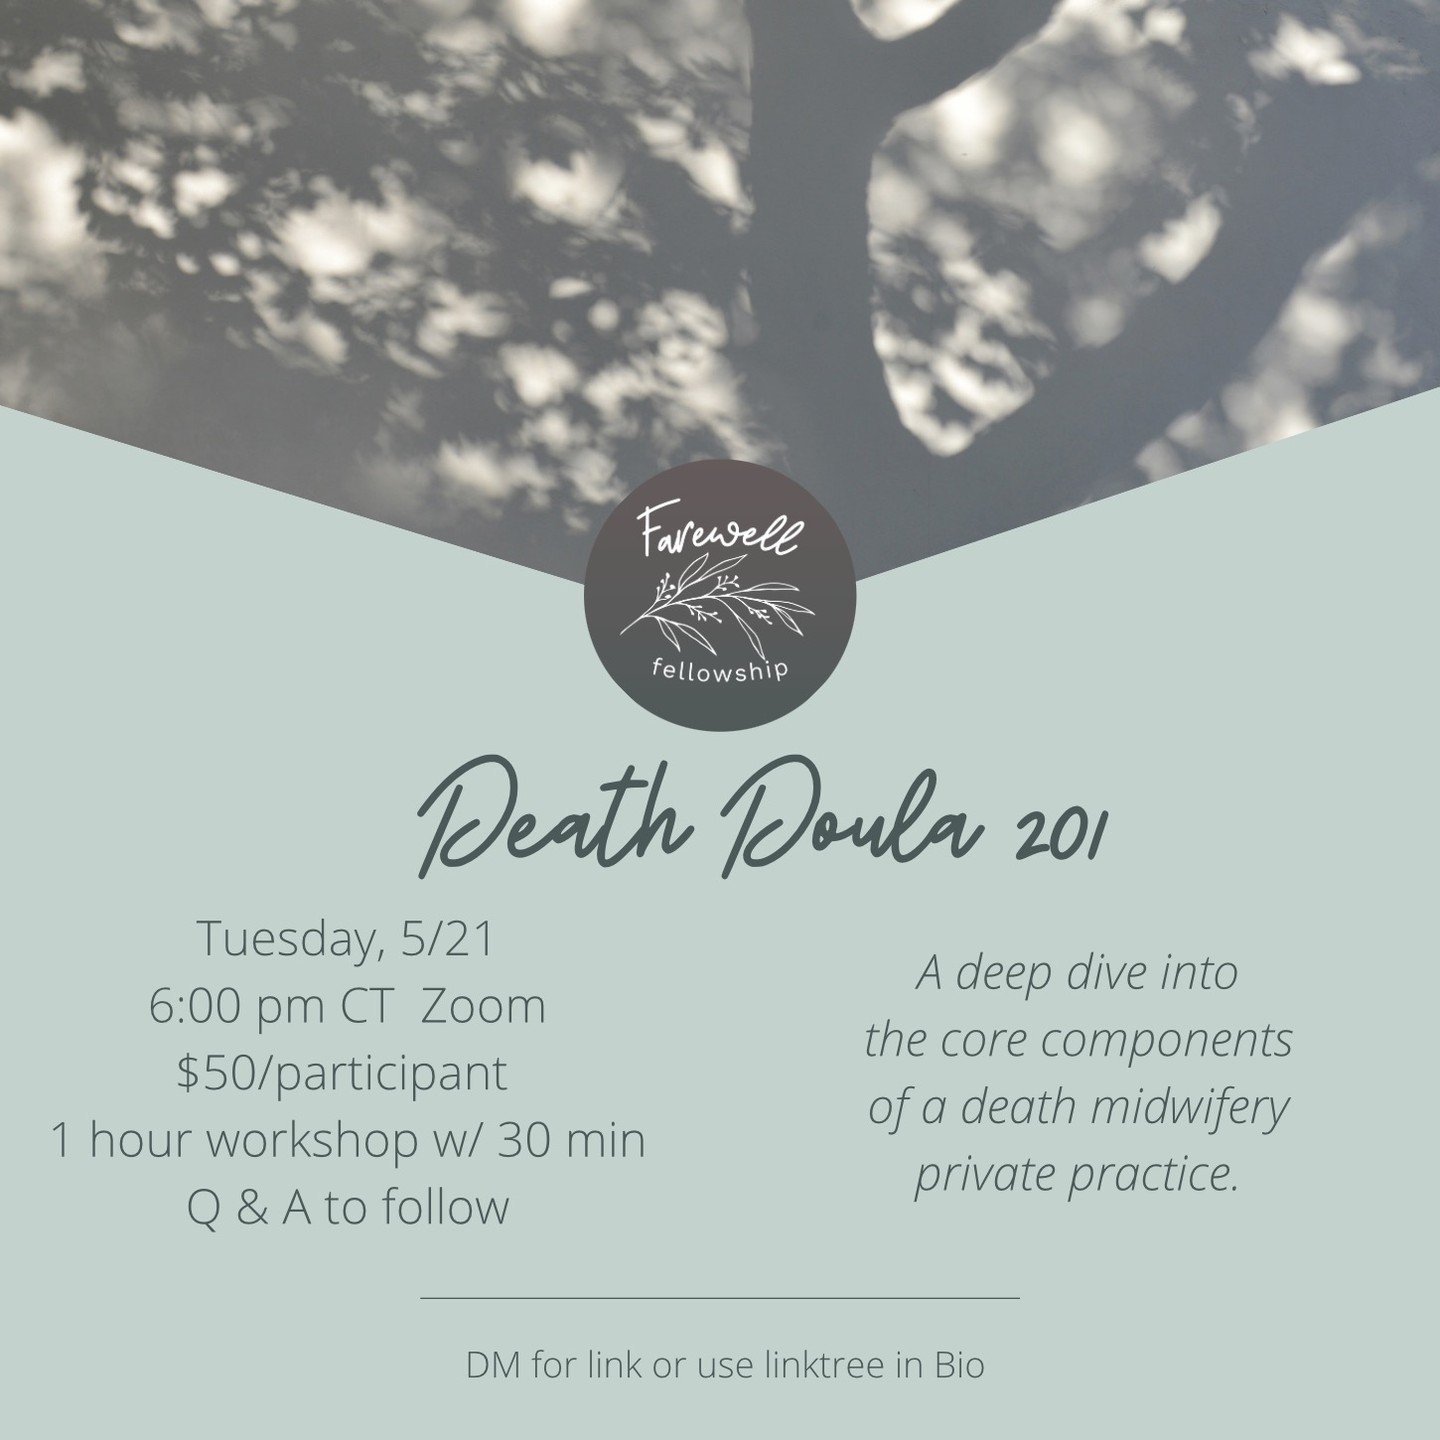 There's a few spots left for next week's Death Doula 201. These can be taken in any order so if you are curious about what death midwifery looks like in private practice, join us for this live workshop. There is currently one spot available for free 